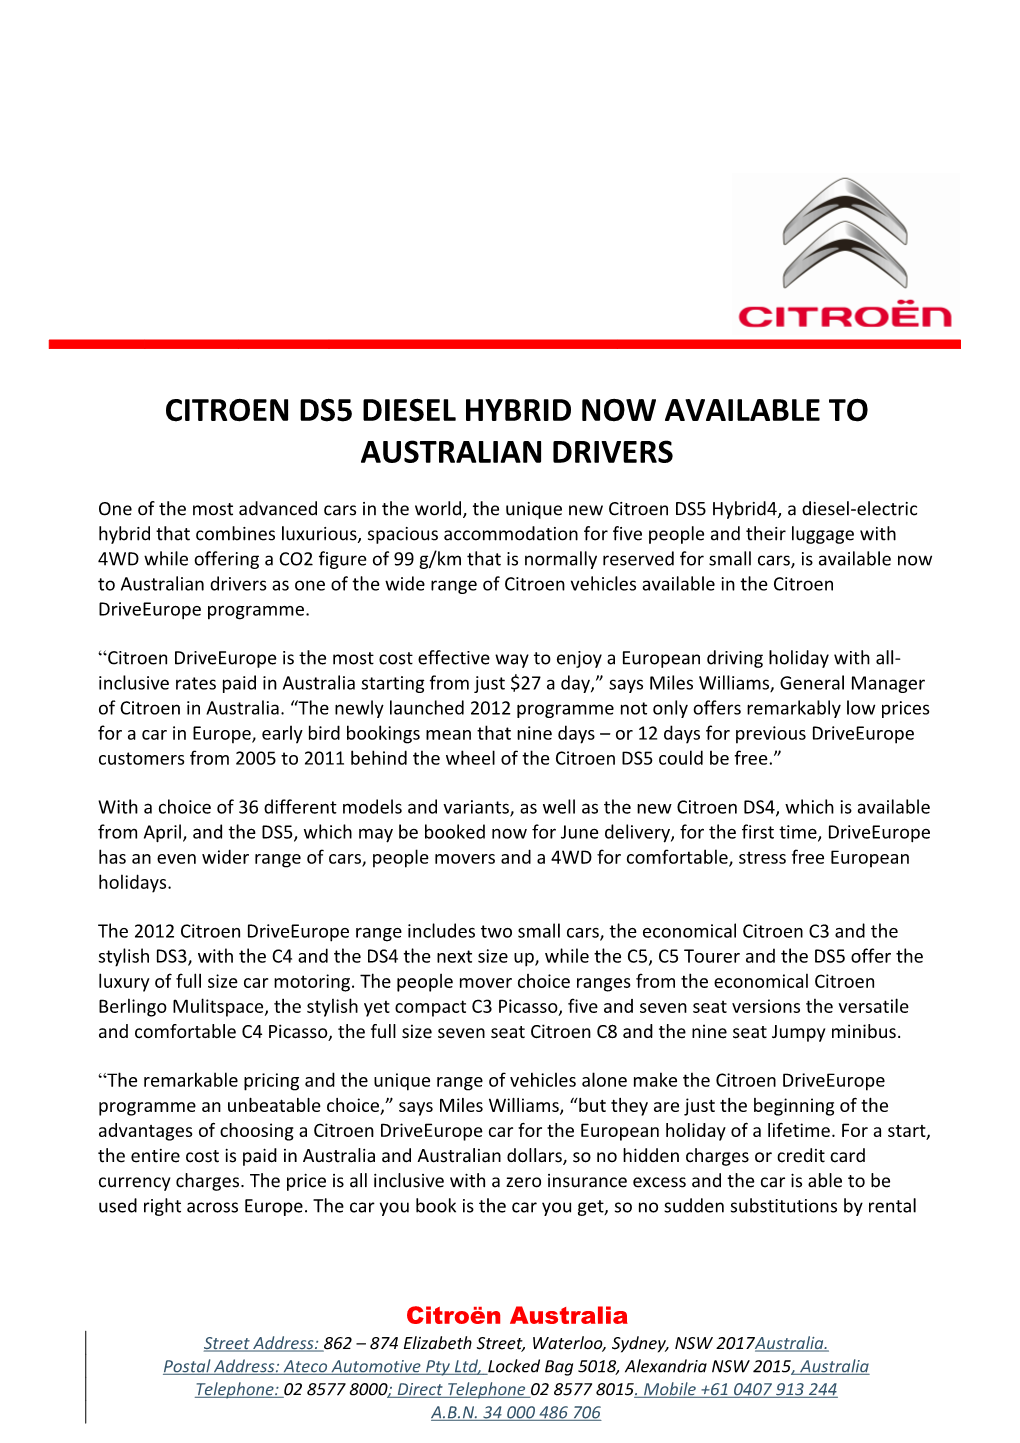 Citroen Ds5 Diesel Hybrid Now Available to Australian Drivers